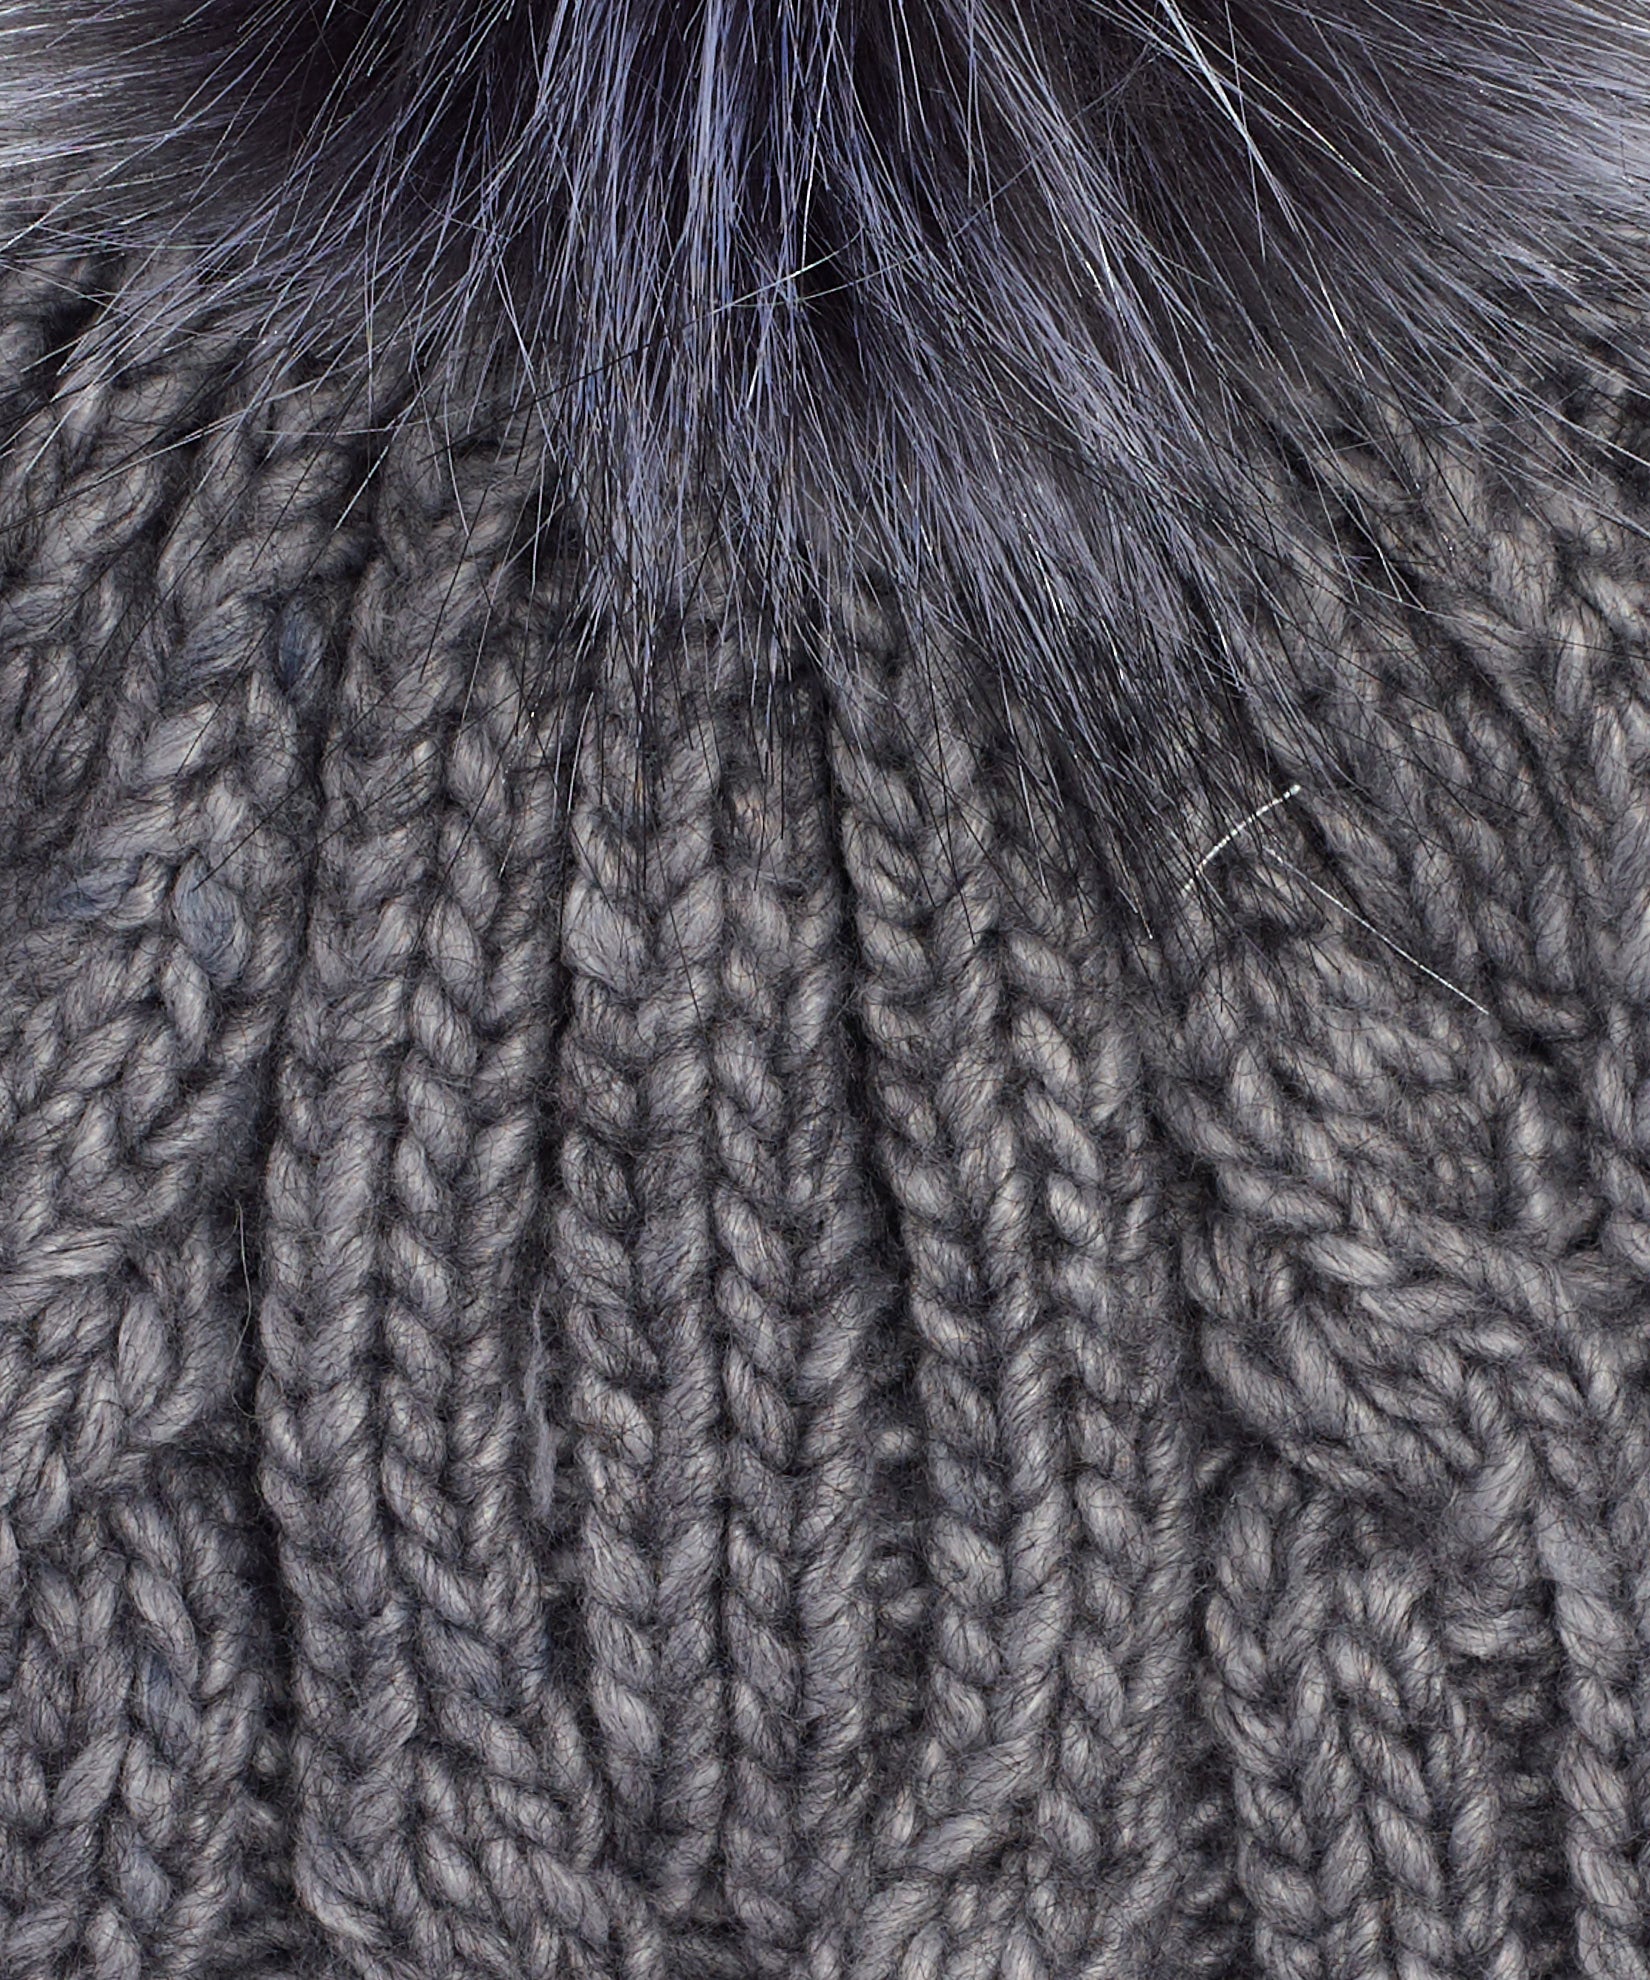 Twisted Cable Pom Hat in color Silver